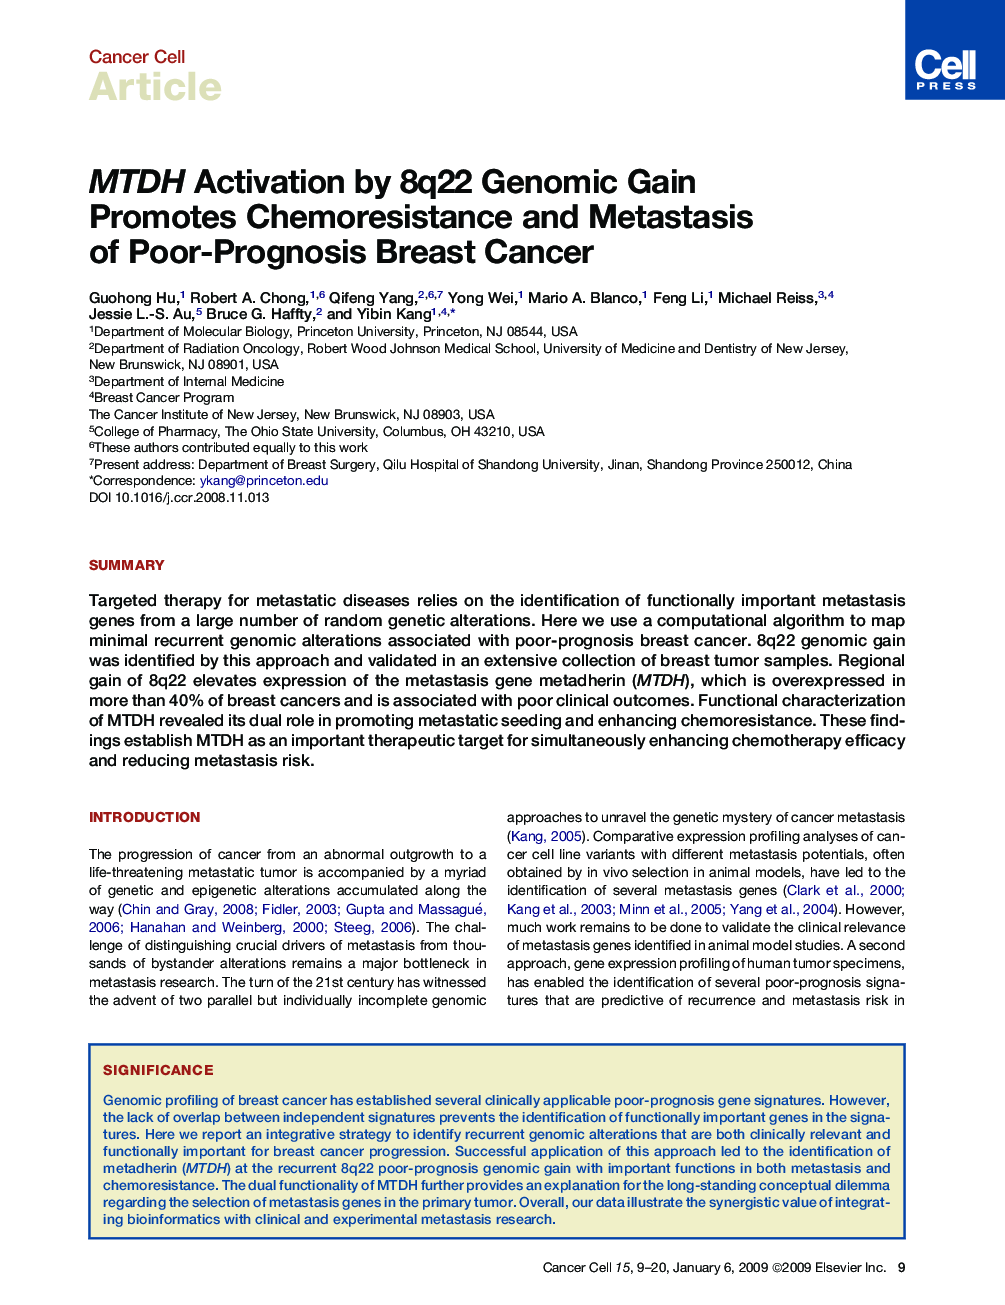 MTDH Activation by 8q22 Genomic Gain Promotes Chemoresistance and Metastasis of Poor-Prognosis Breast Cancer